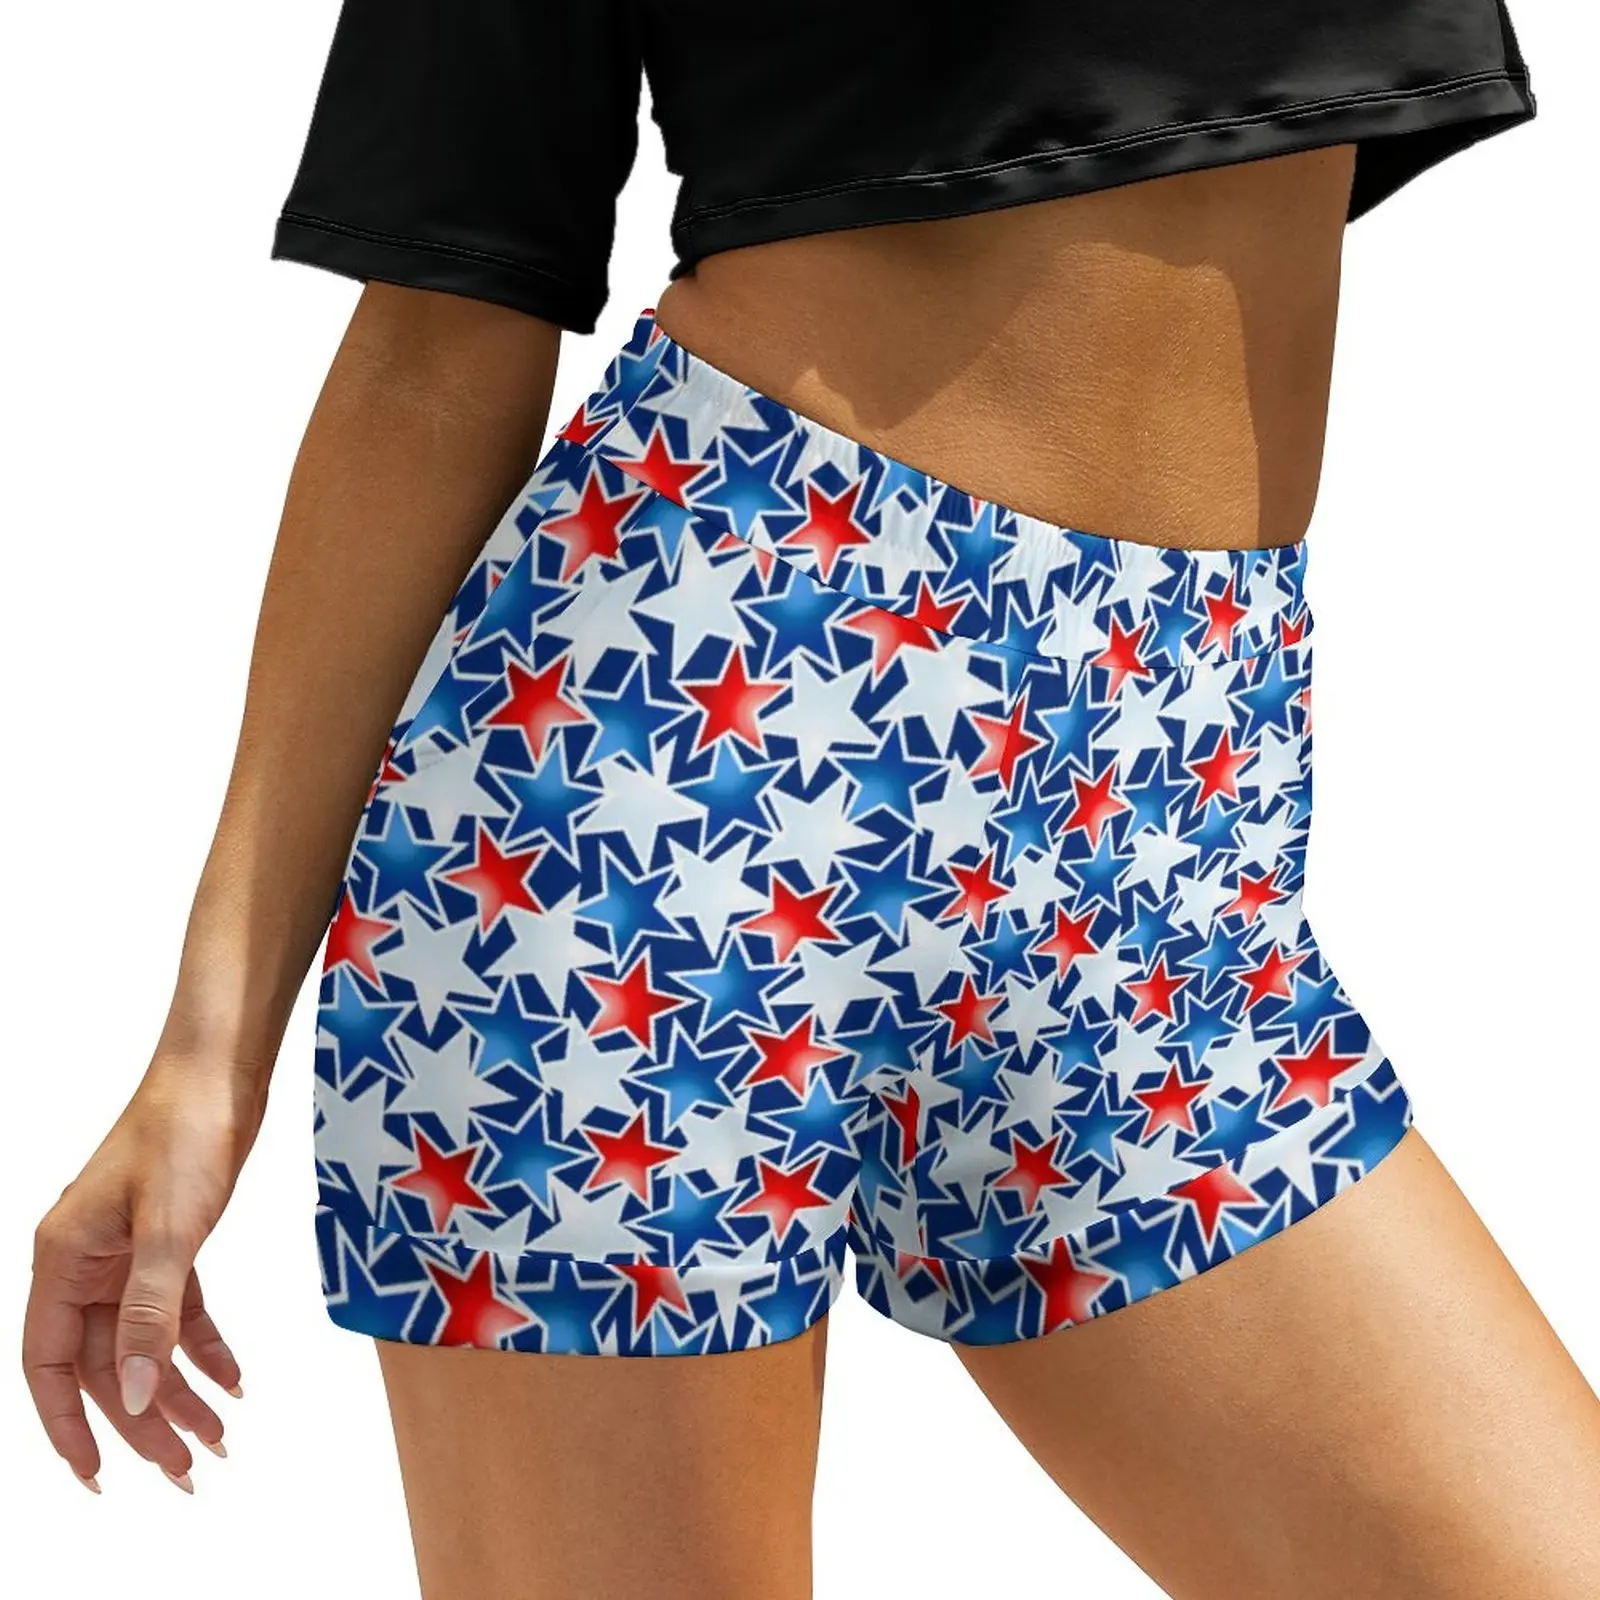 Red White And Blue Star Shorts High Waist Abstract Stars Print Y2k Shorts Trendy Oversize Short Pants Fashion Bottoms Present